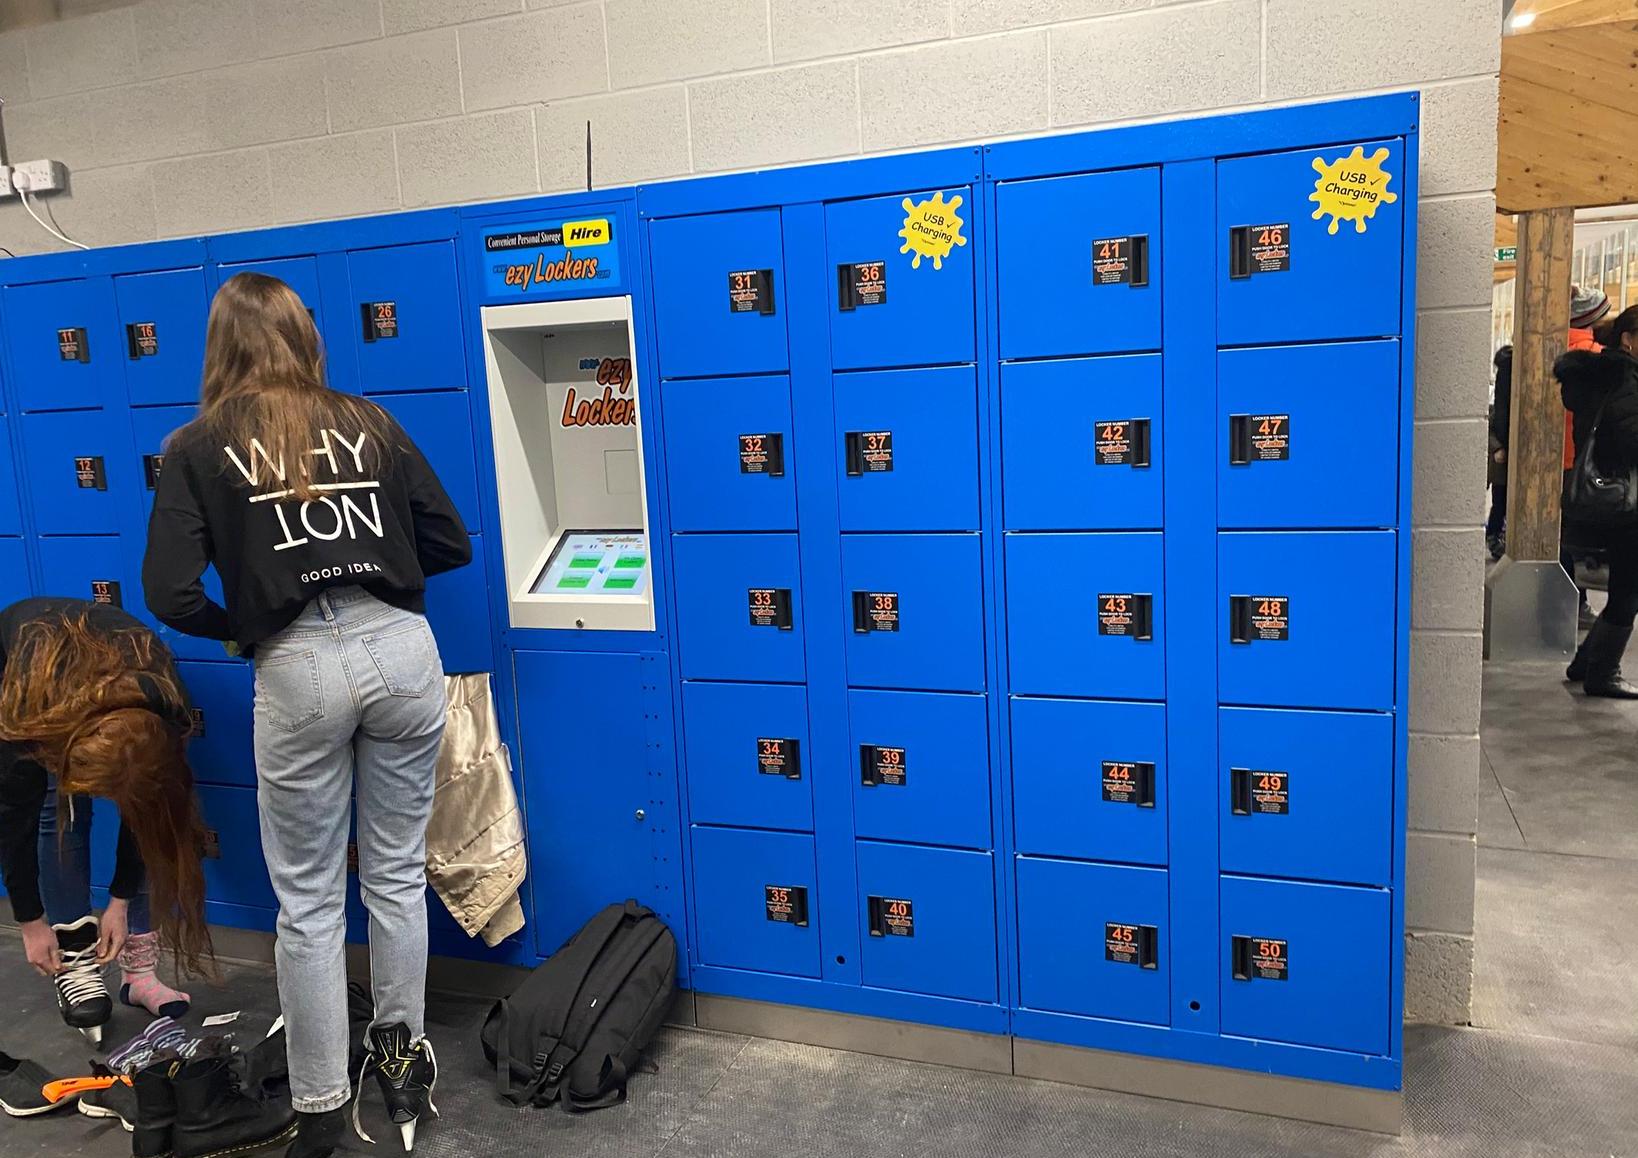 Lockers are available